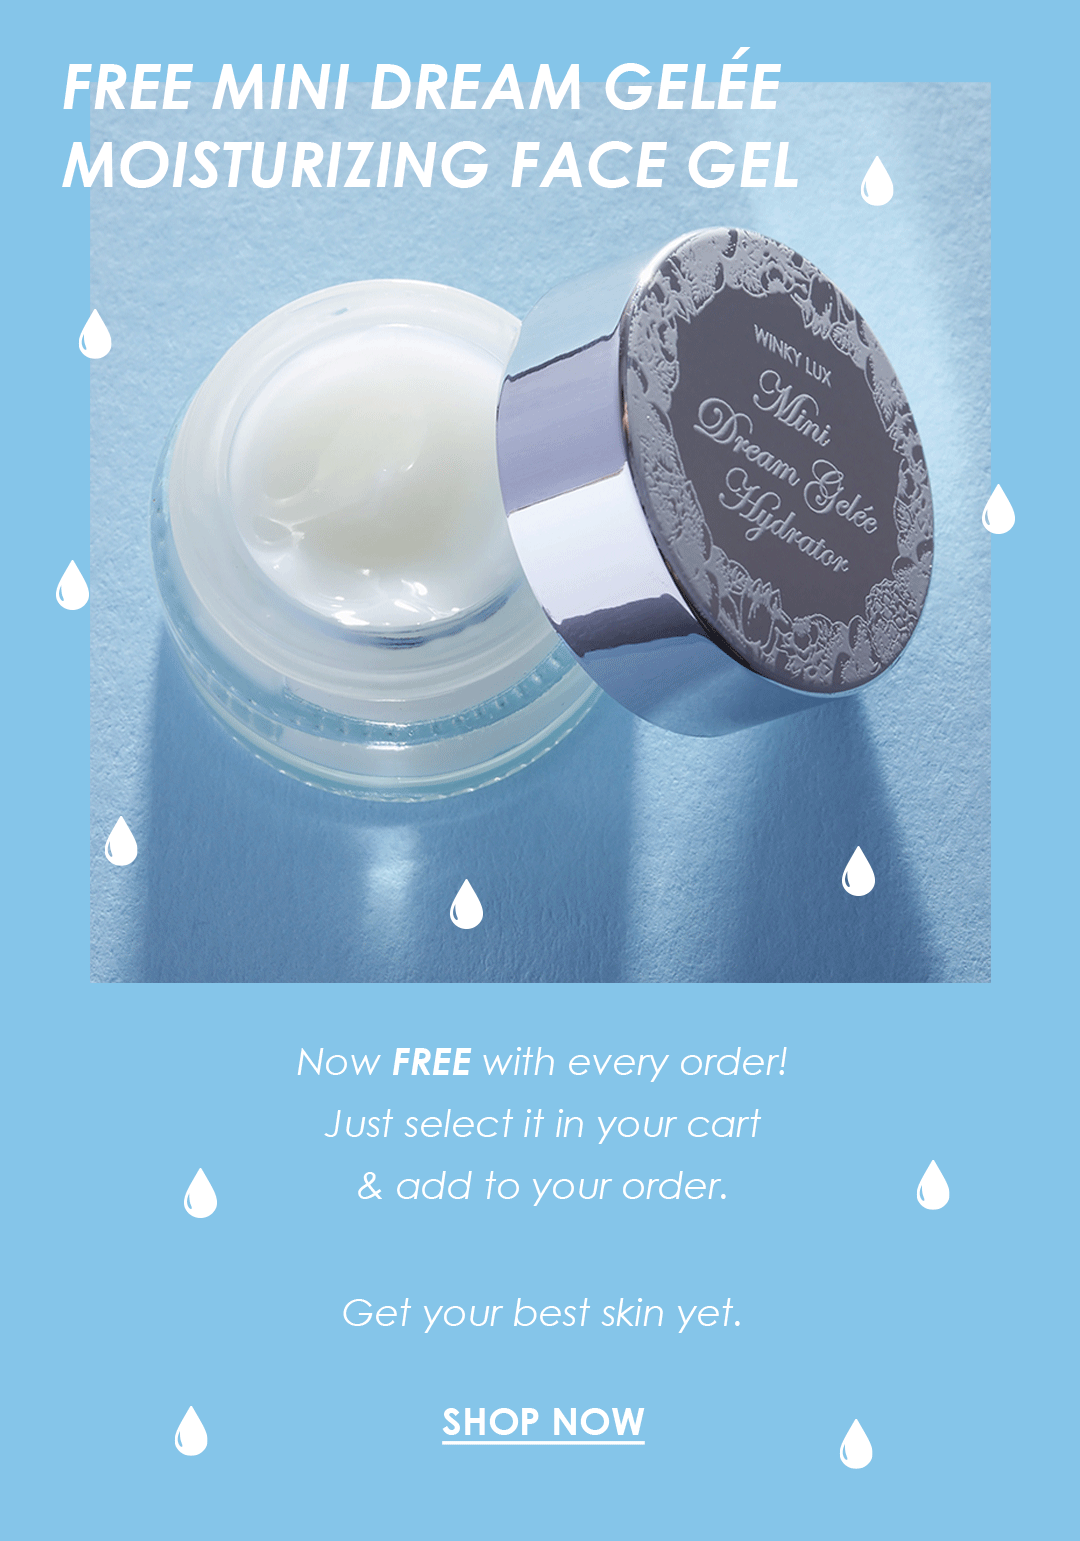 Free Mini Dream Gelee Moisturizer with every purchase!